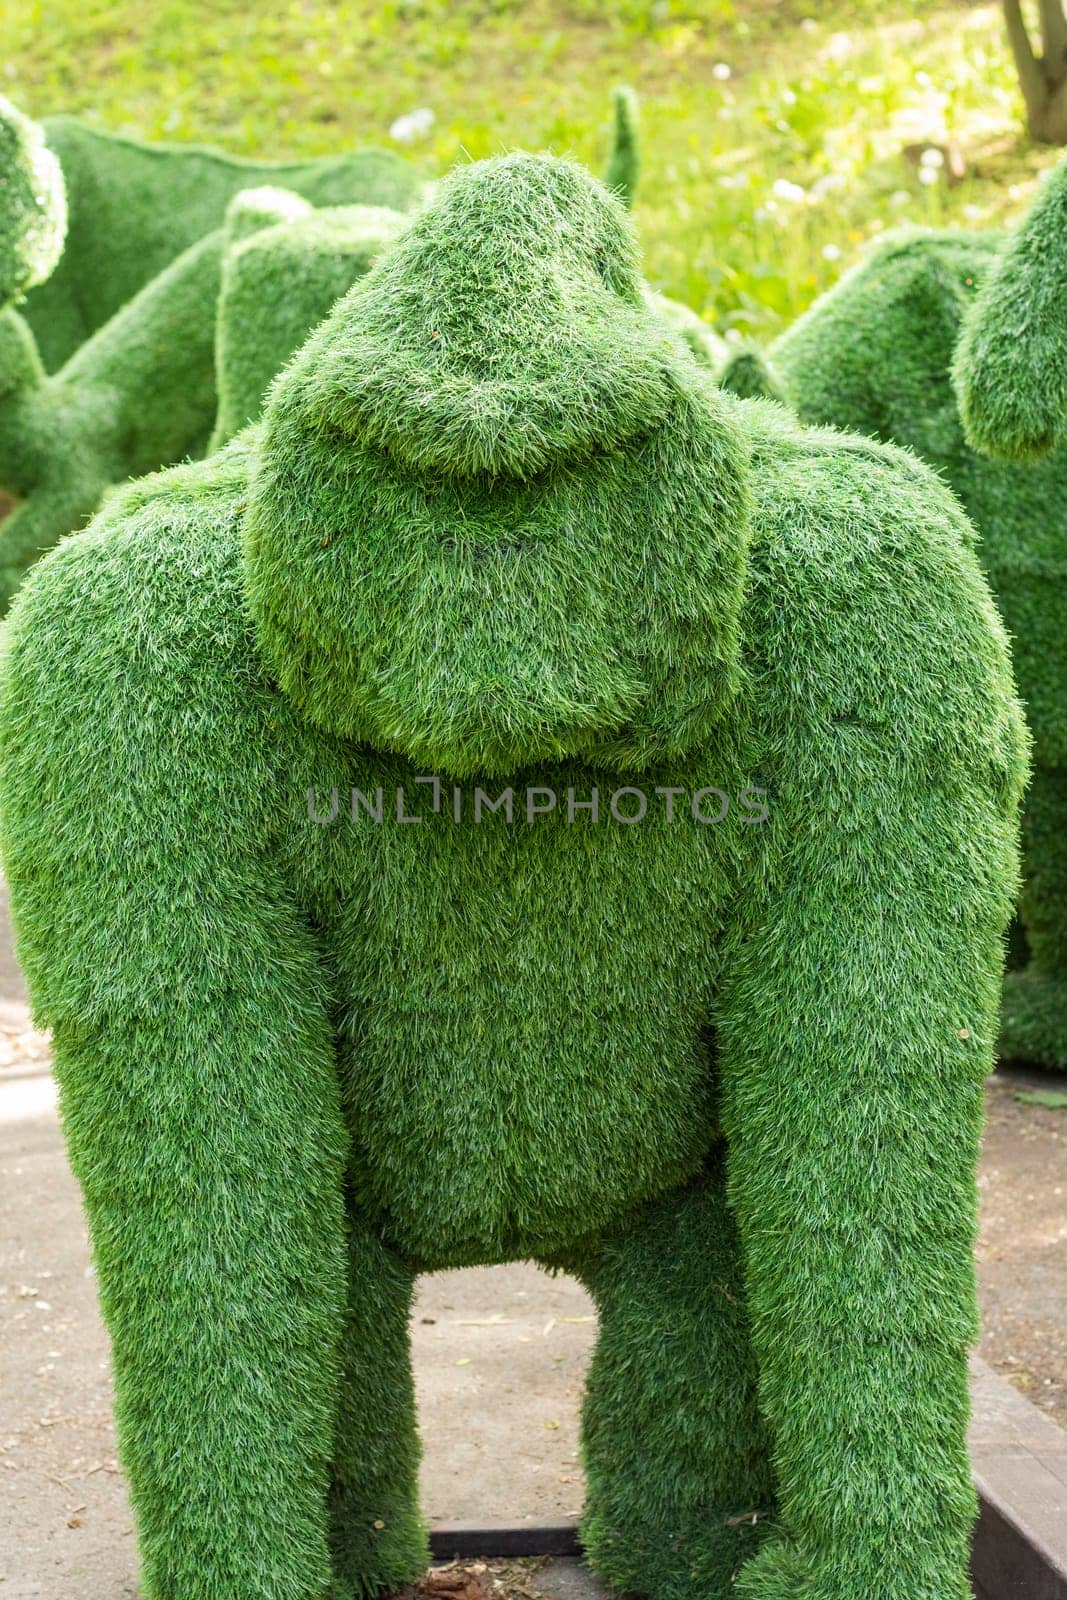 orangutan created from bushes at green animals. garden decoration. Figures for the exhibition of artificial grass. Topiary gardens. garden statues, sculptures.